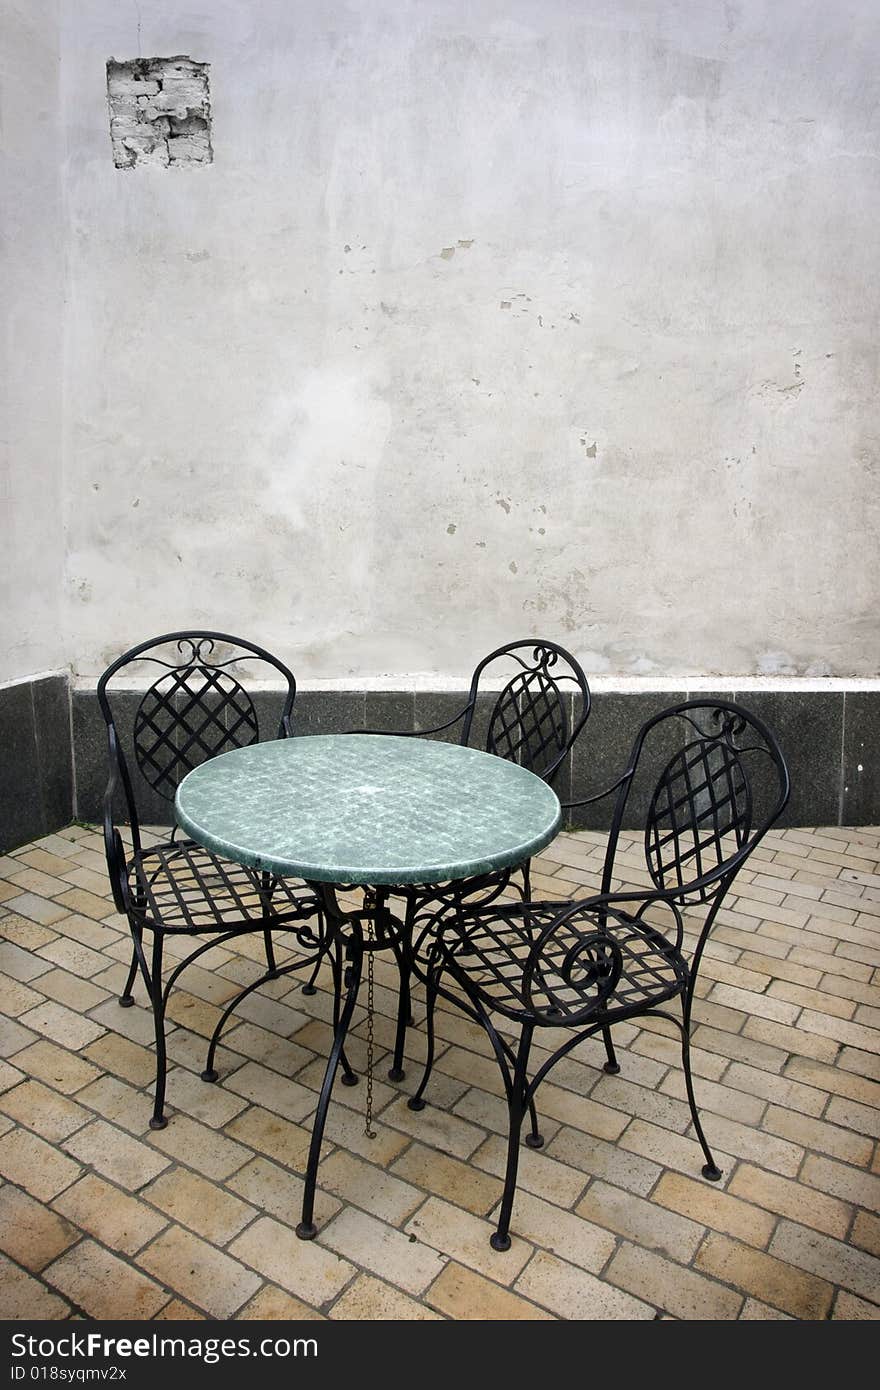 Café table and three chairs in Kyiv, Ukraine.